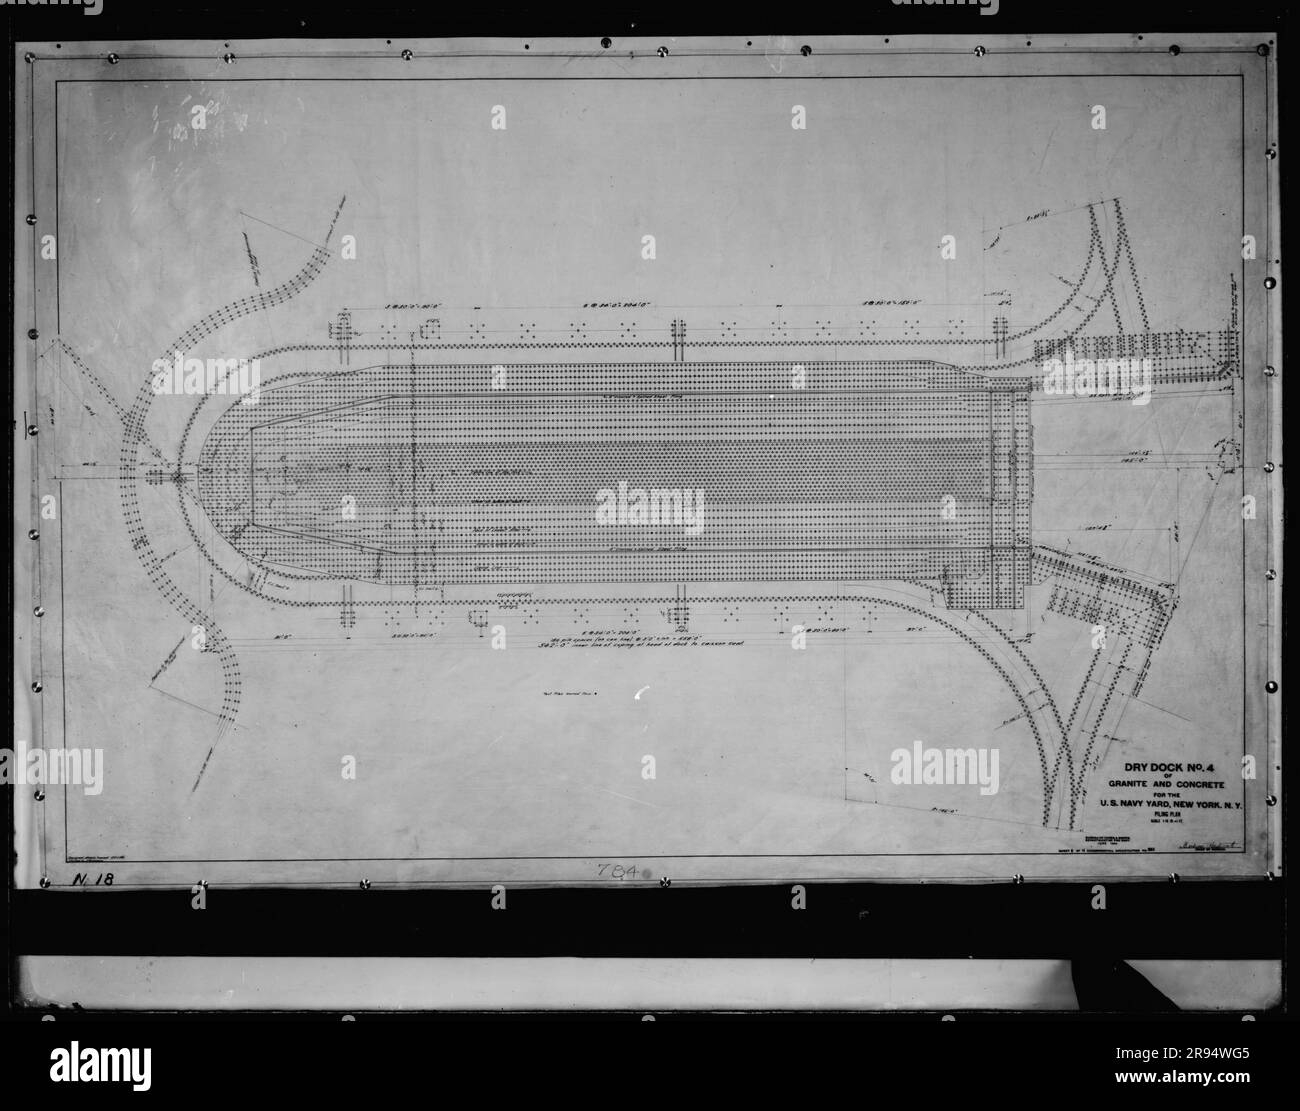 Drawing: Dry Dock Number 4, Granite and Concrete for the US Navy Yard, New York, New York, Piling Plan. Glass Plate Negatives of the Construction and Repair of Buildings, Facilities, and Vessels at the New York Navy Yard. Stock Photo